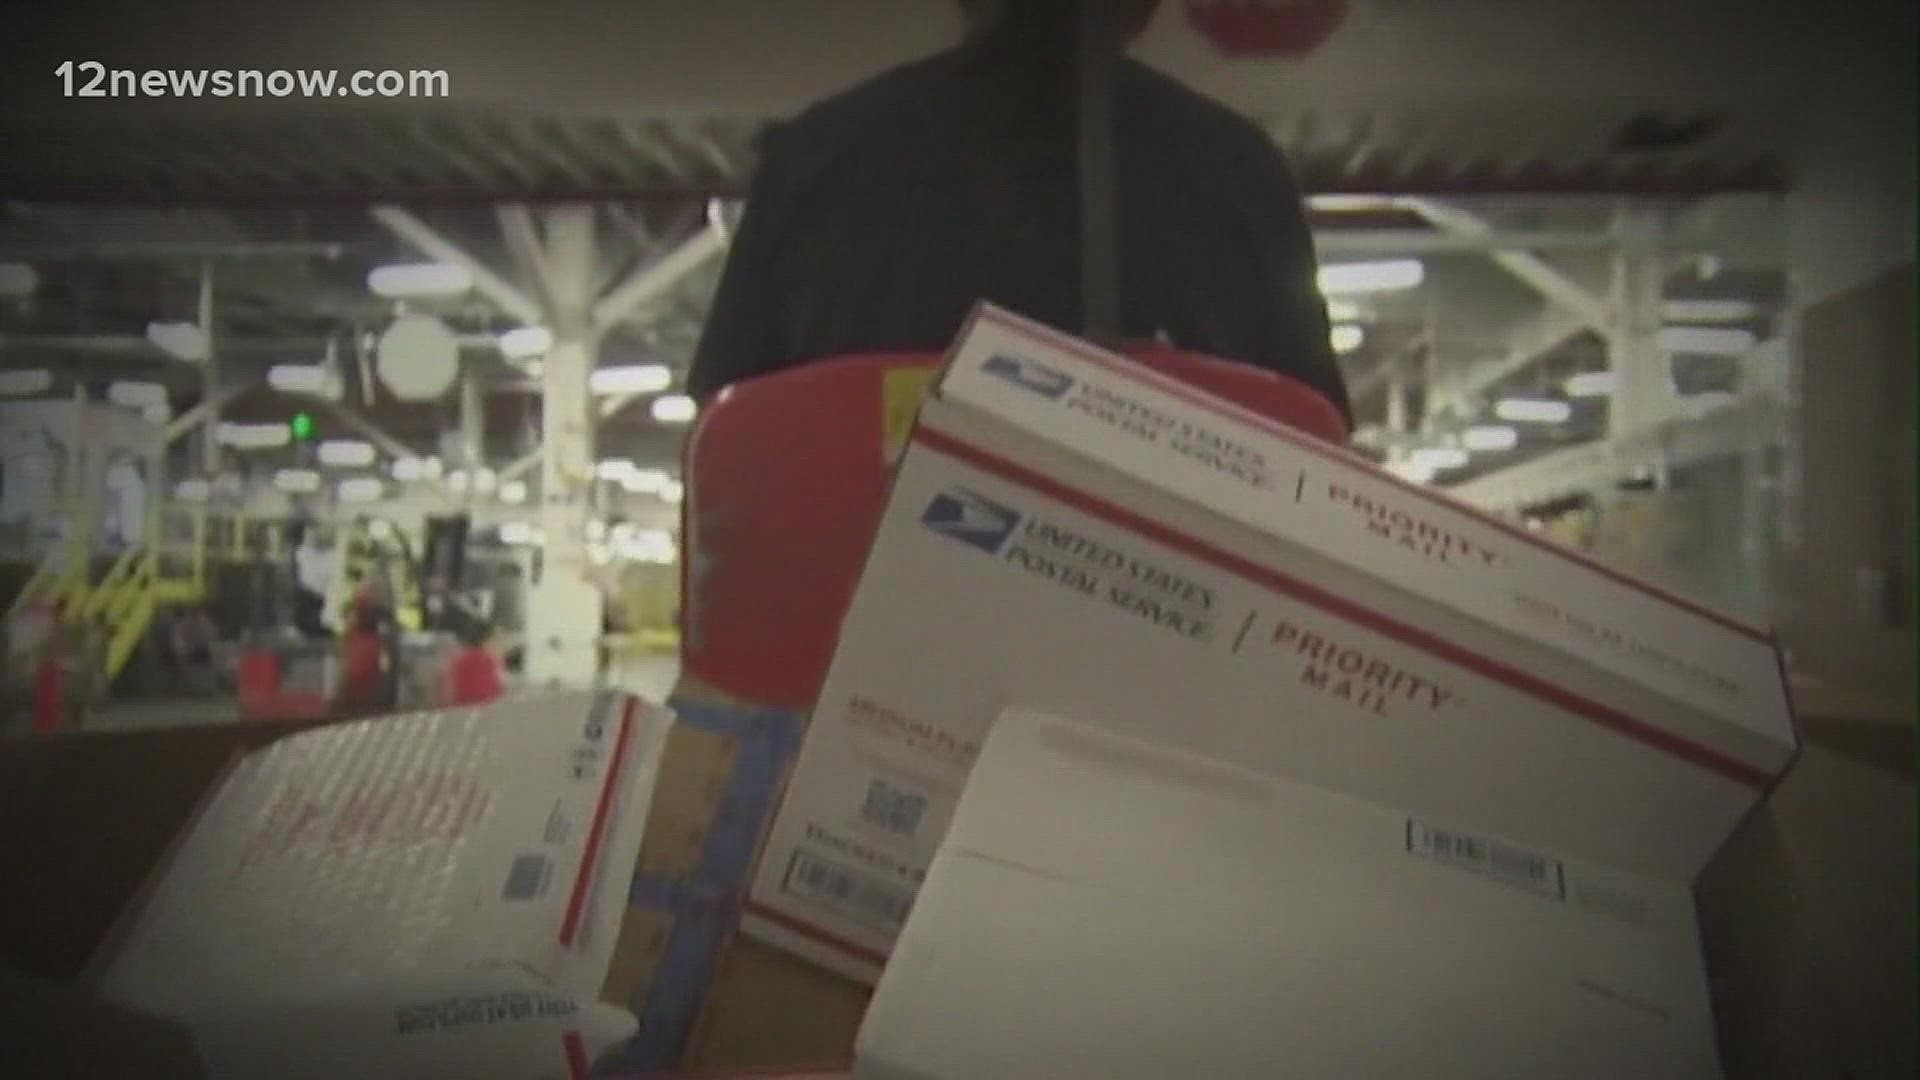 This year, holiday scams are on the rise.